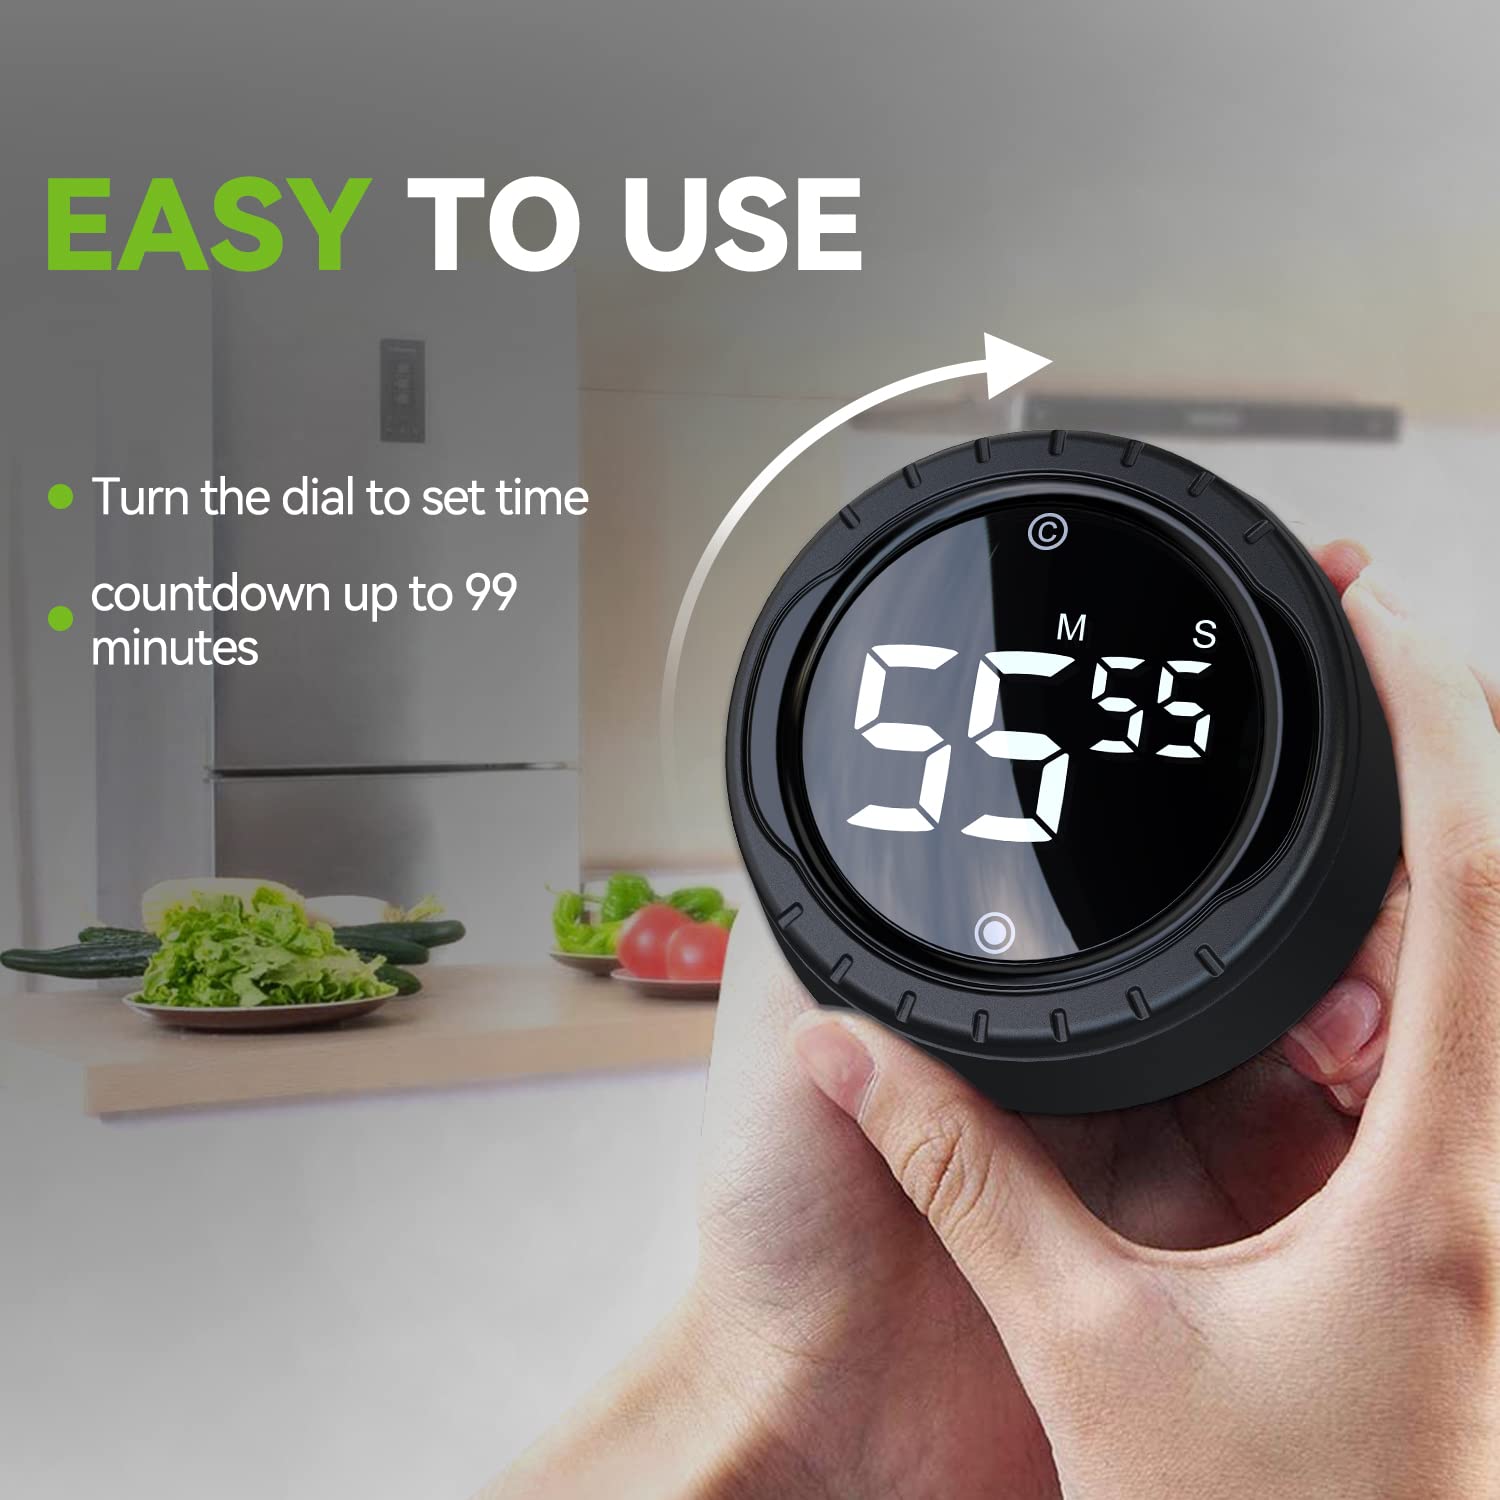 BALDR Timer, Digital Countdown Timer with Large LED Display. Magnetic Kitchen Timer, Great for The Classroom, Toothbrush, Exercise, Bathroom, Oven, Baking, Meeting.